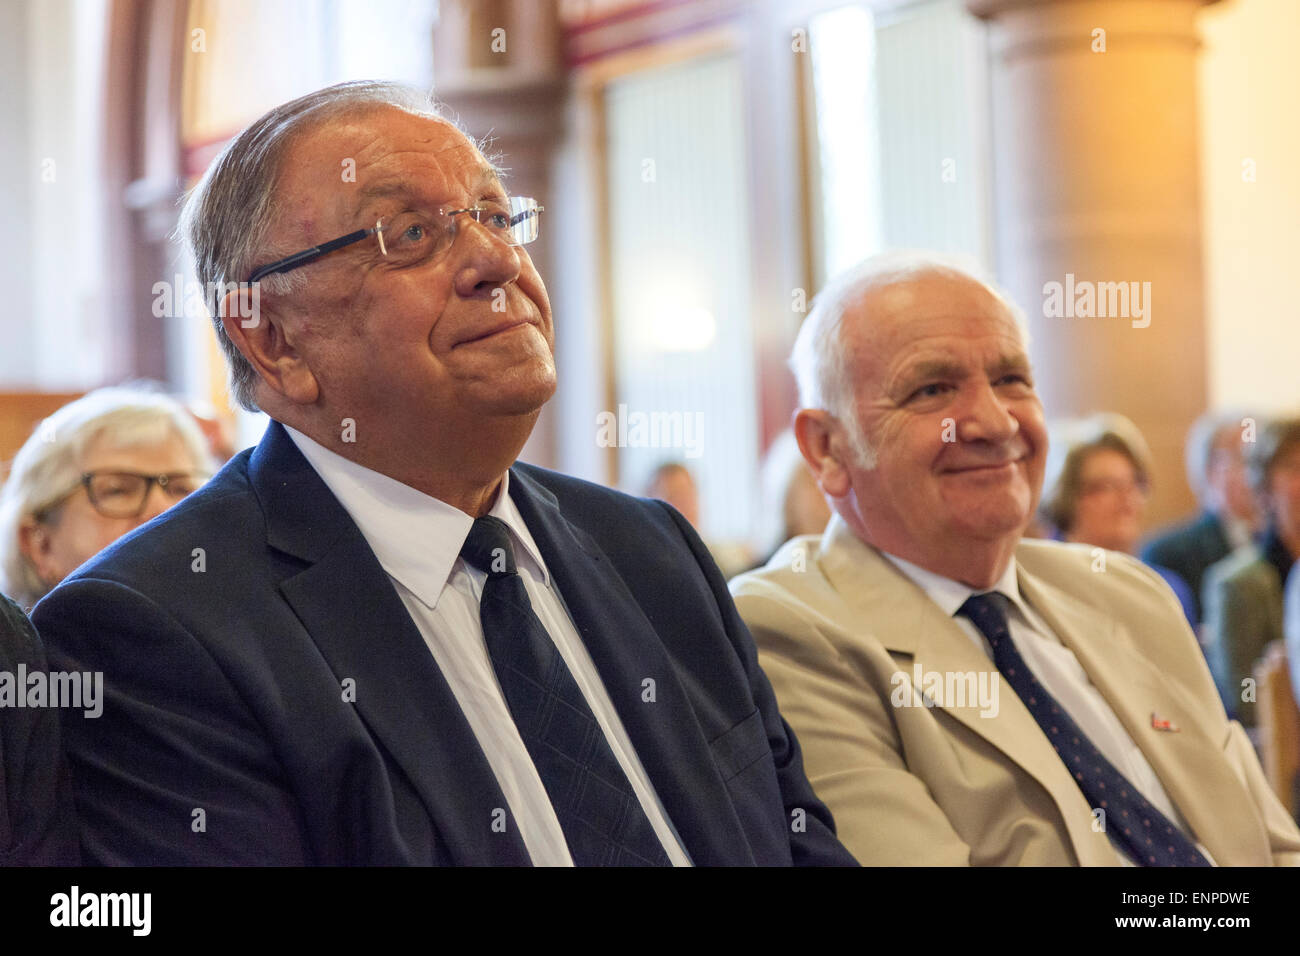 Holy Trinity Church, Chesterton, UK. 8 May 2015. Pete Conway, father of singer Robbie Williams, and Douglas Brock at the Memorial Service for the life of Singer/Songwriter Jackie Trent. Credit:  John Henshall / Alamy Live News PER0554 Stock Photo